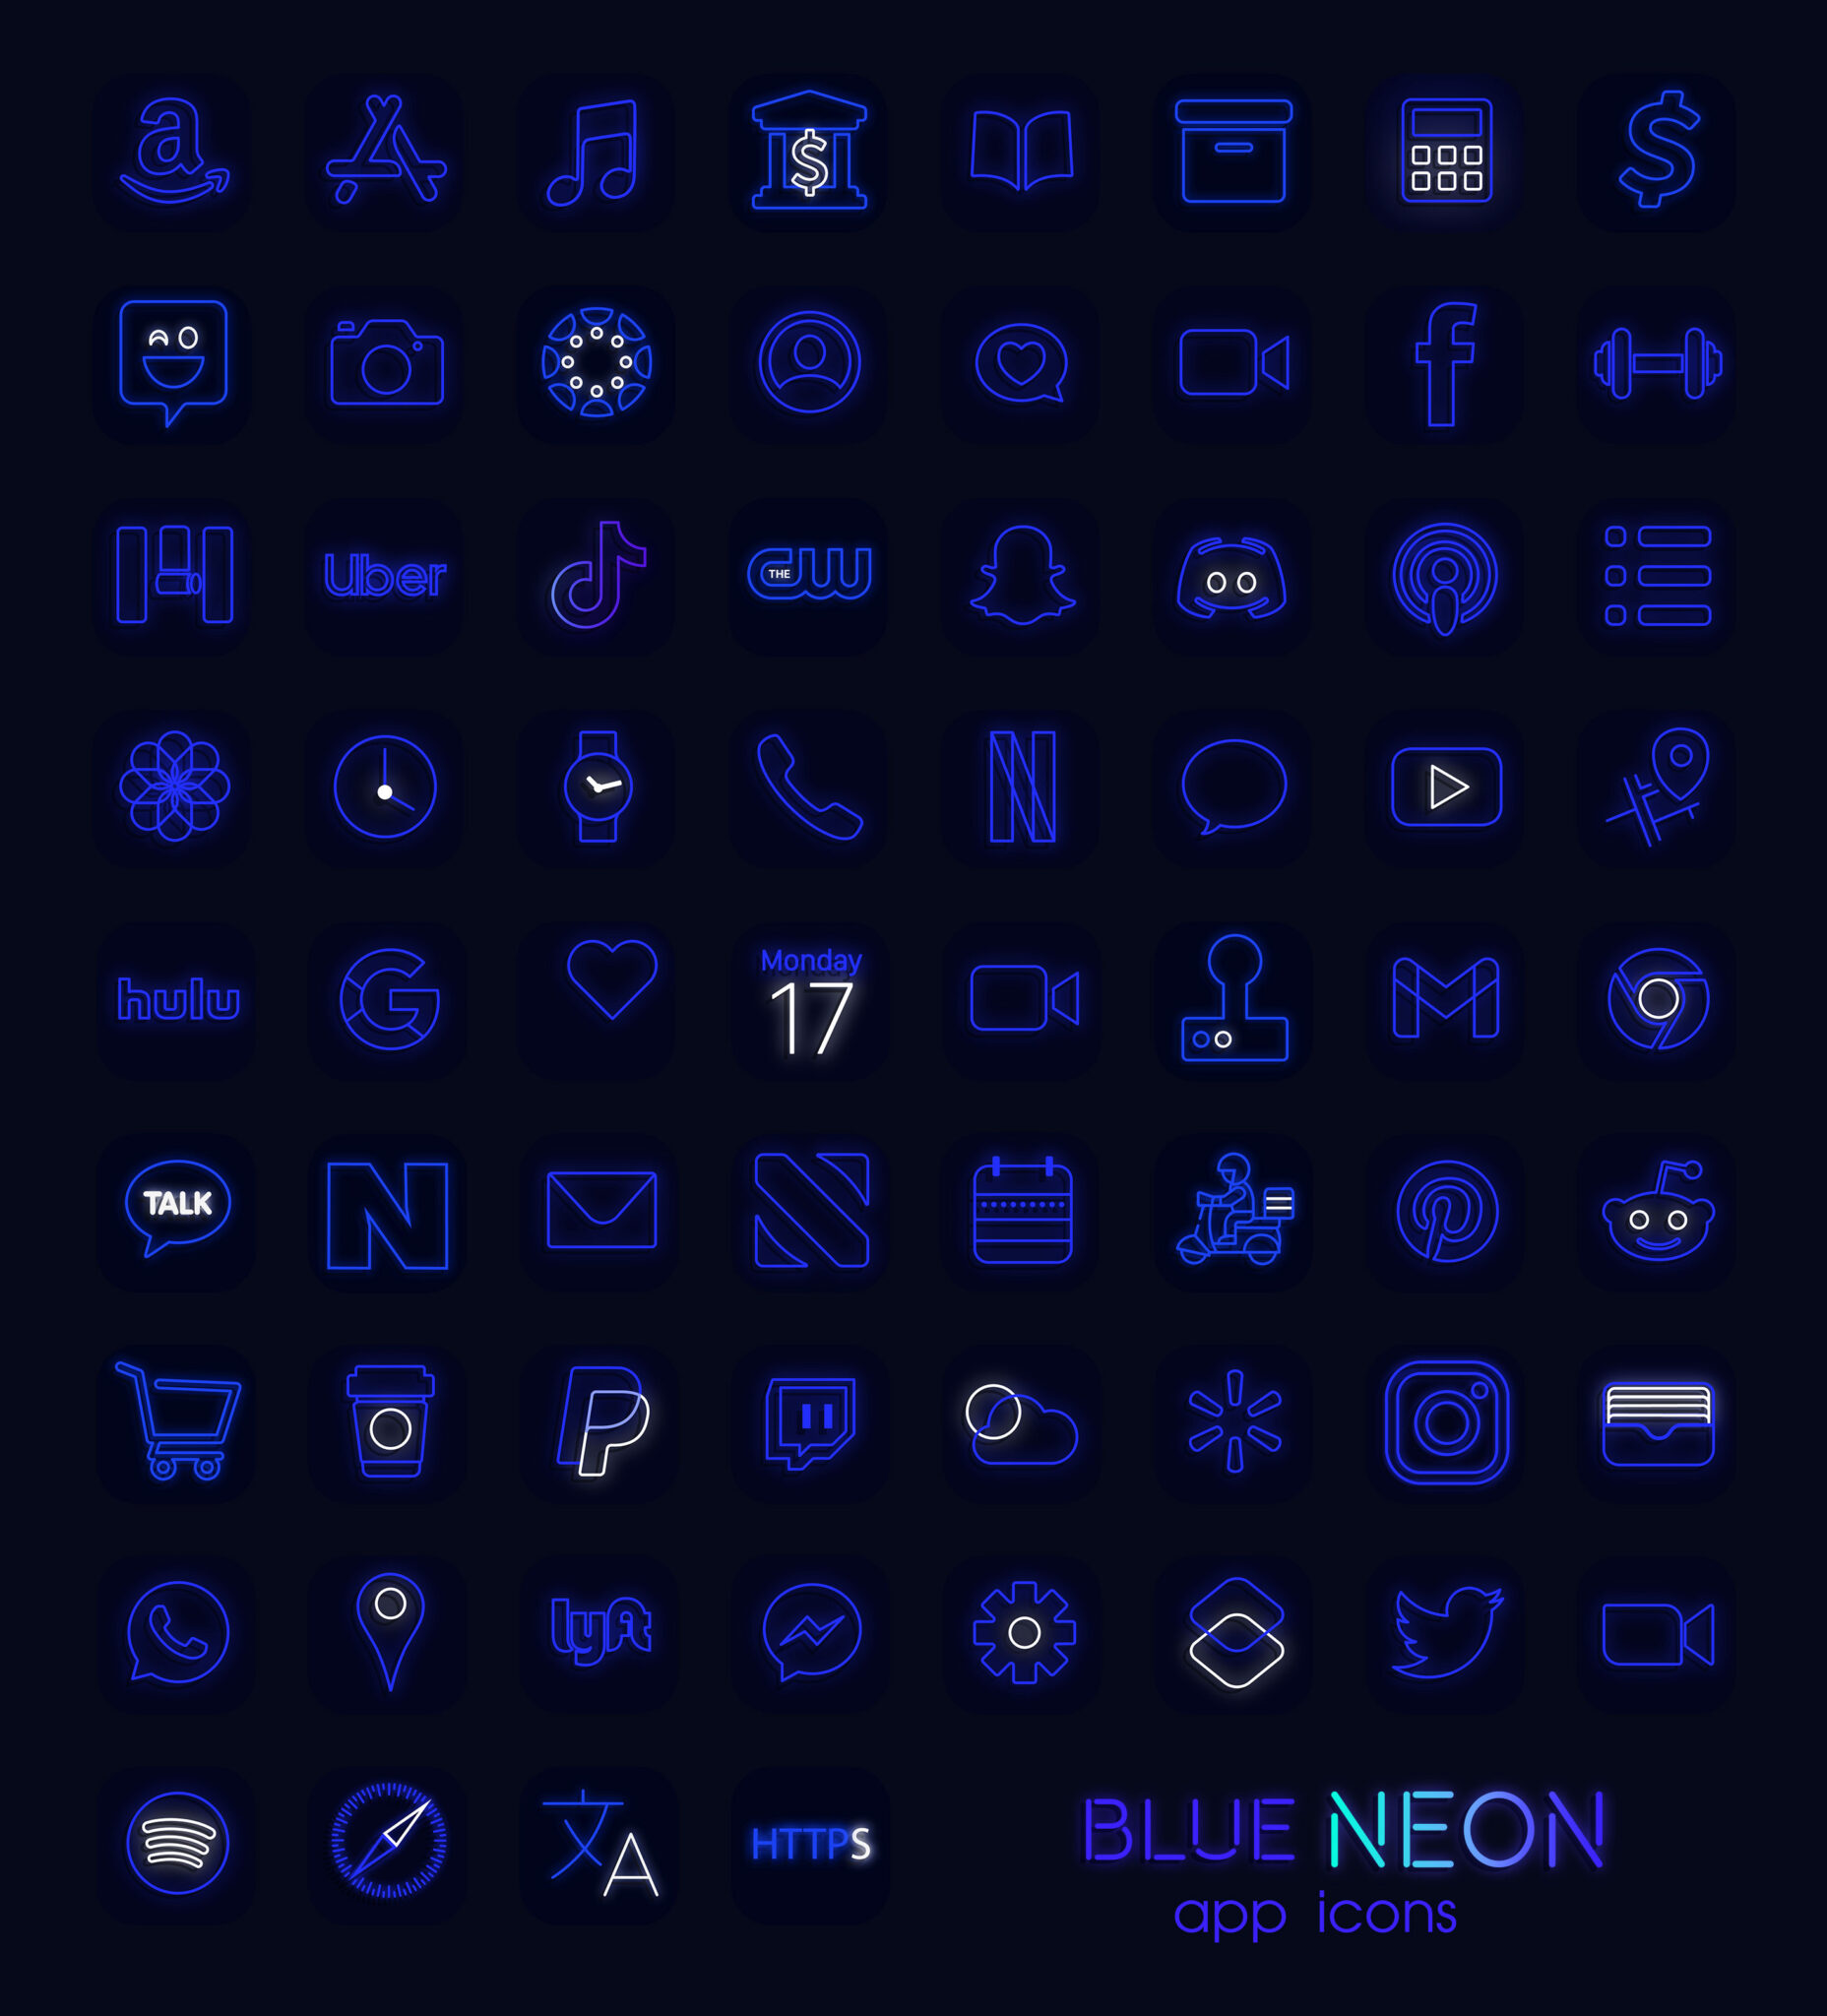 Blue Neon App Icons for iOS 14 & Android - Change App Icons on iPhone